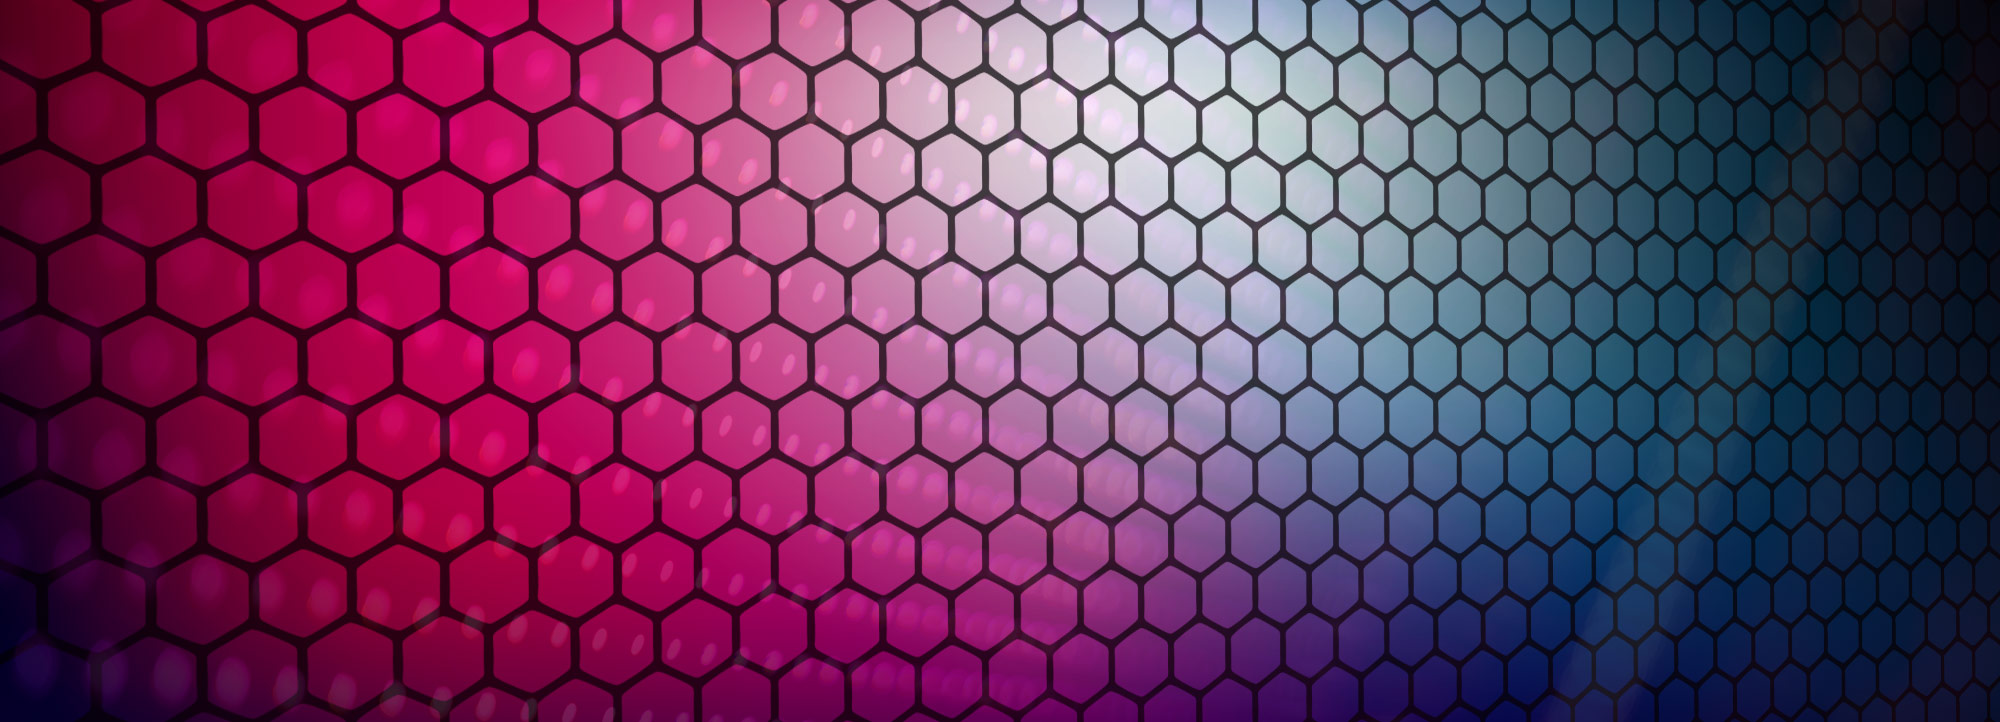 hexagon grid over blue and purple background